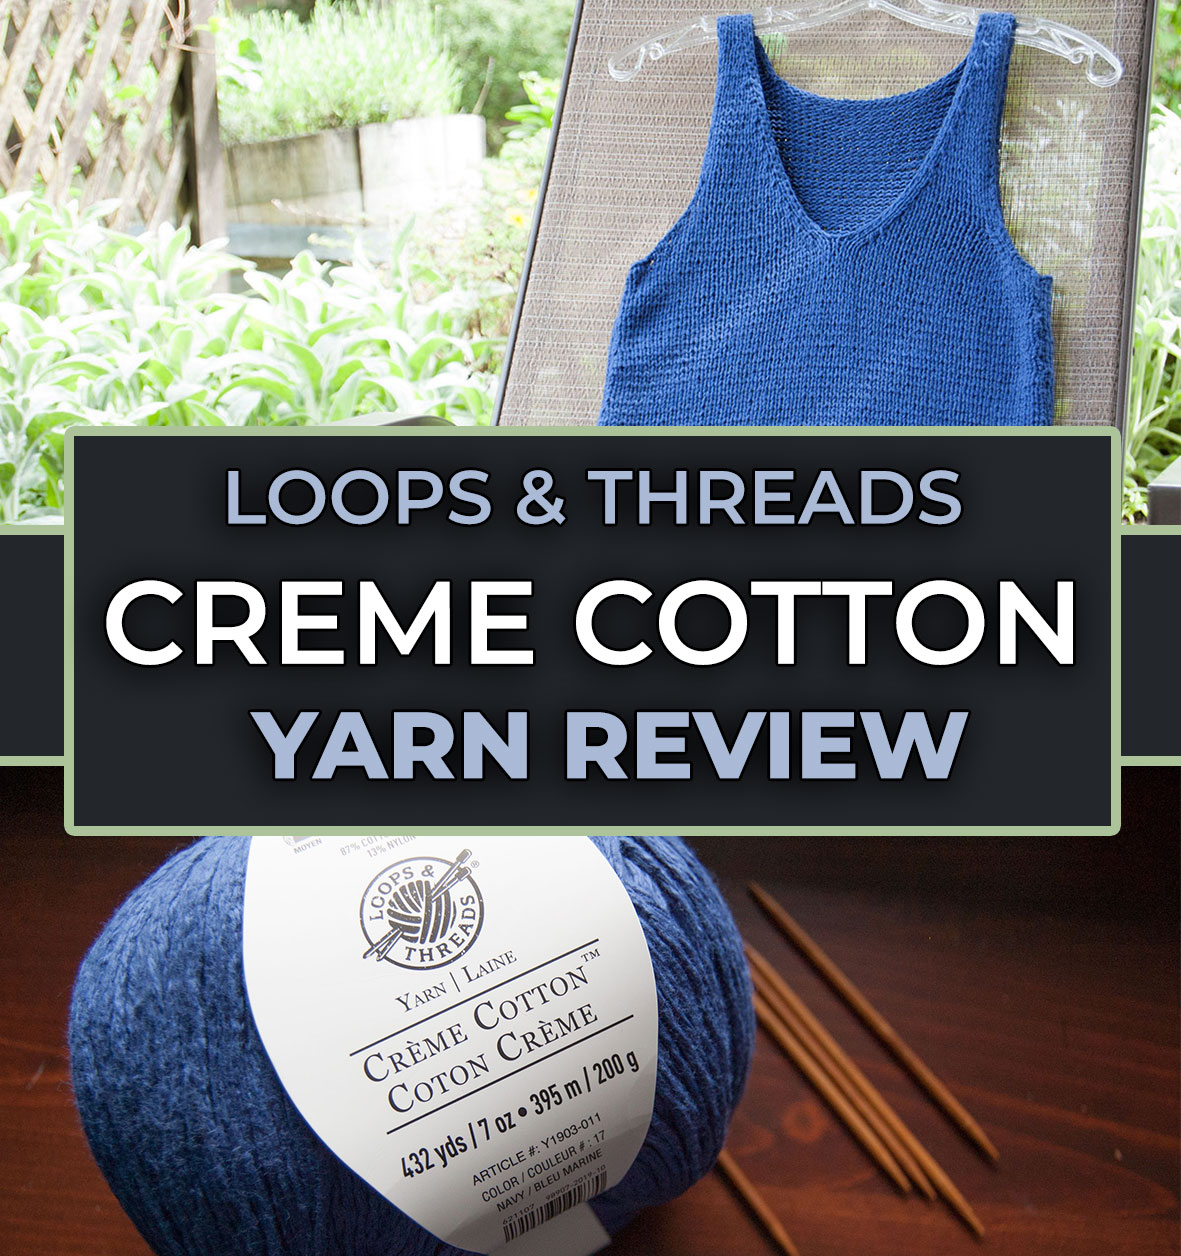 Loops & Threads Creme Cotton Yarn Review - Budget Yarn Reviews